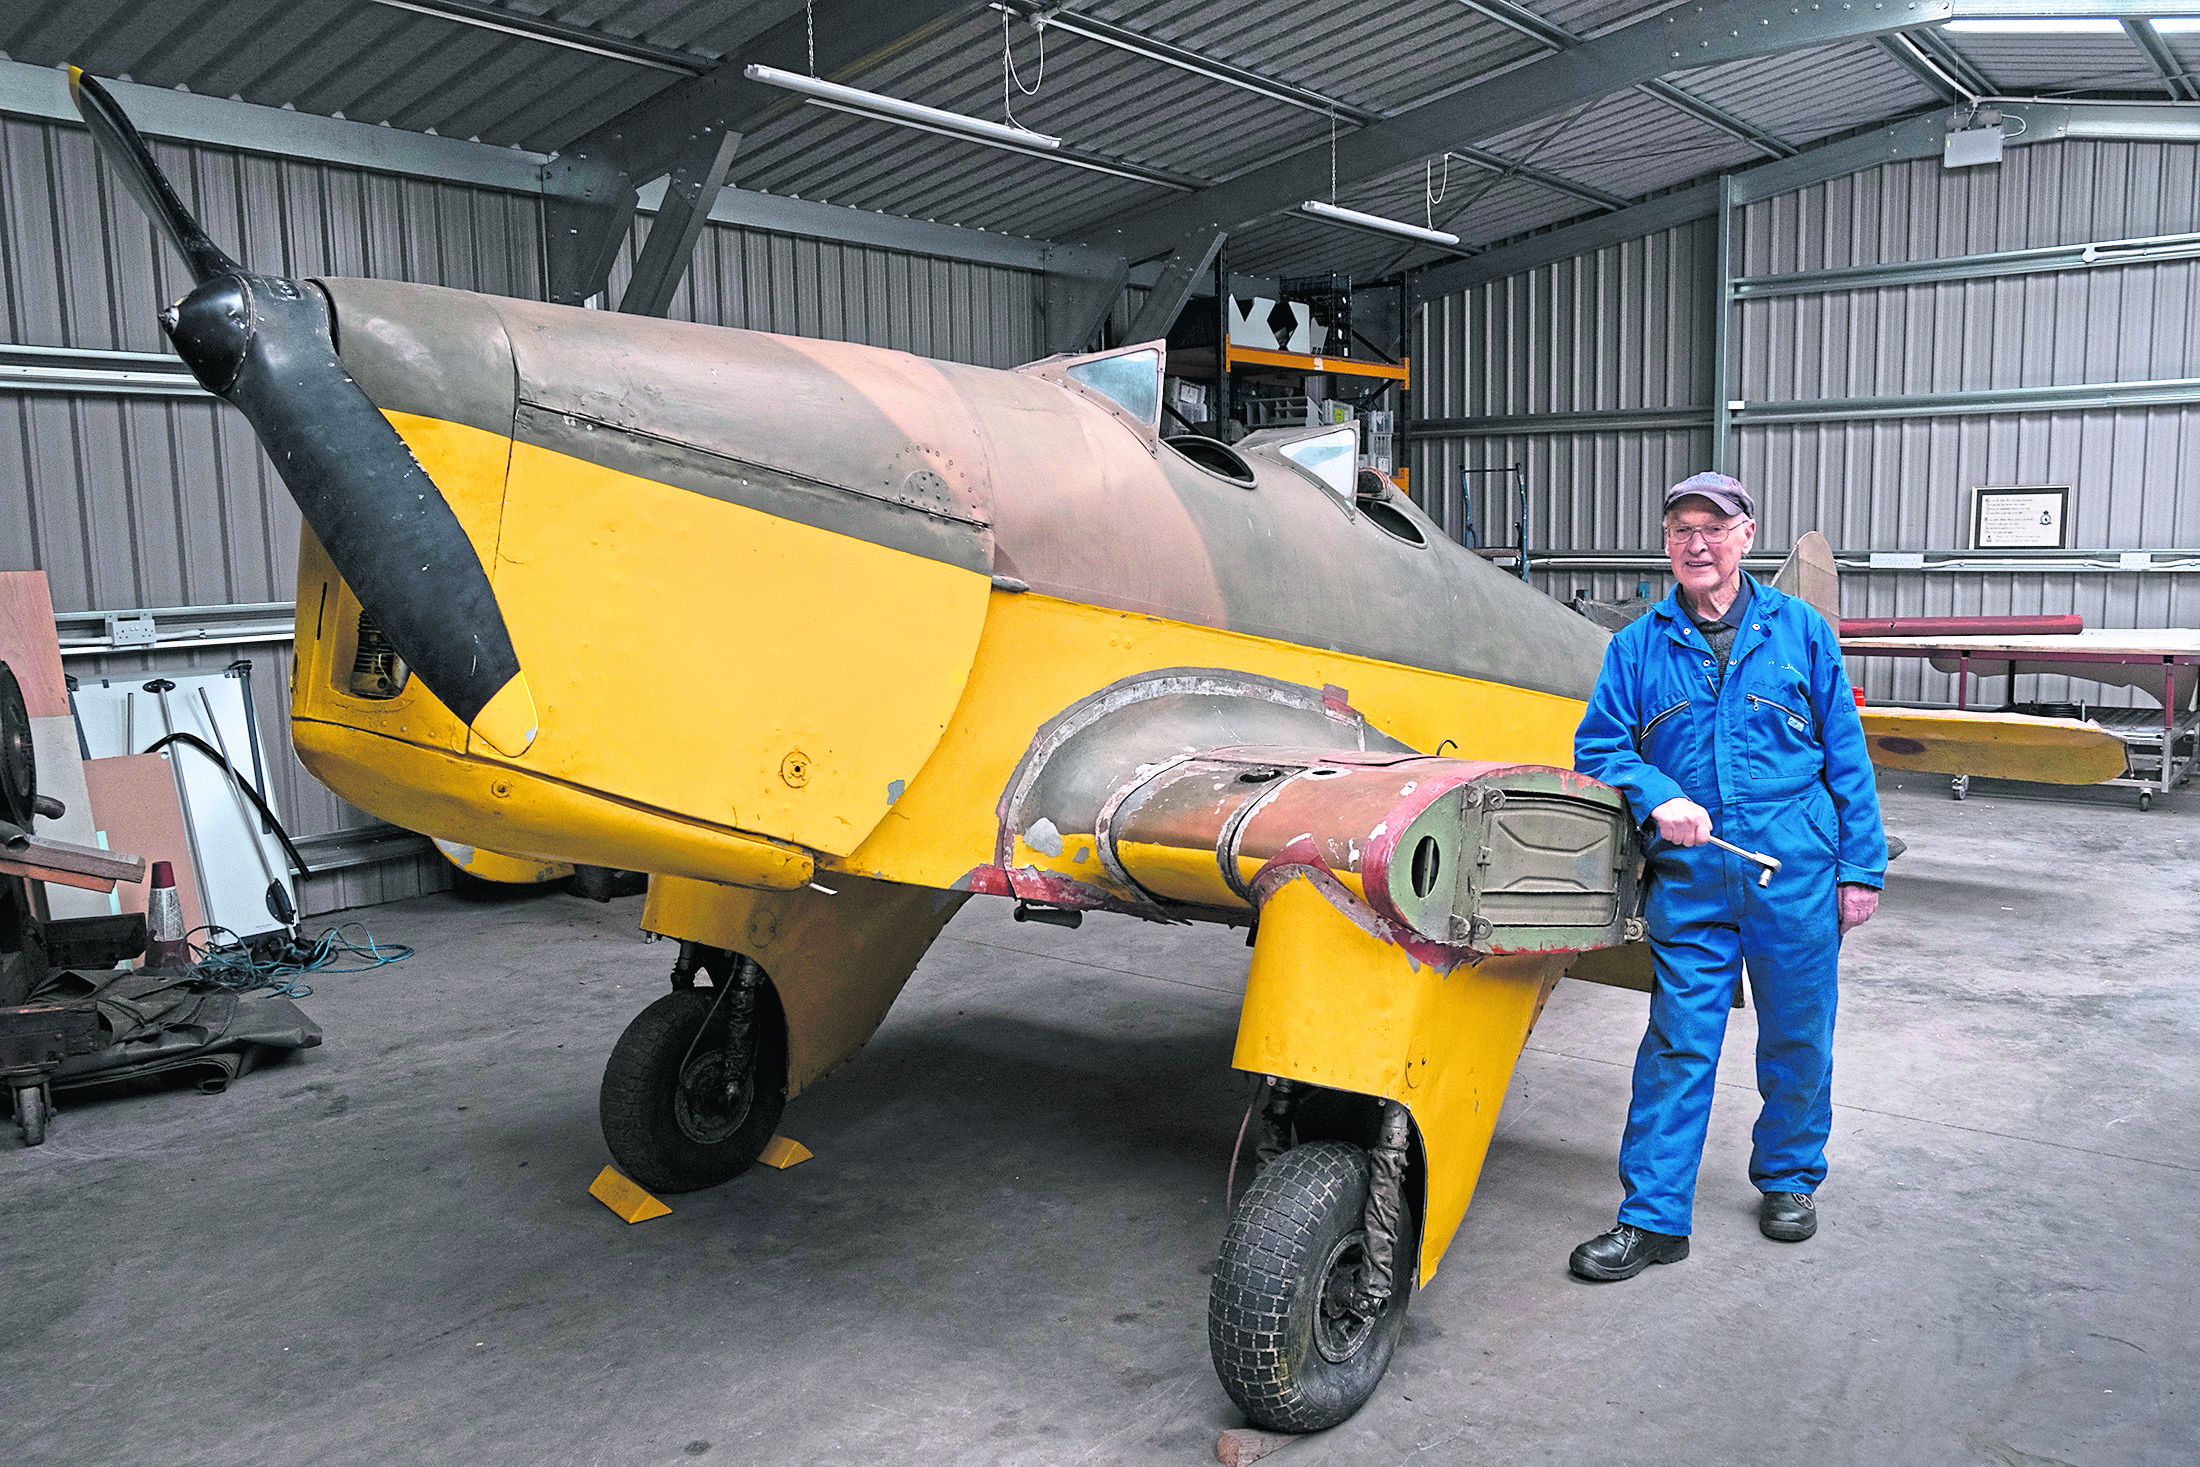 Volunteer Andy Lawrence with the plane